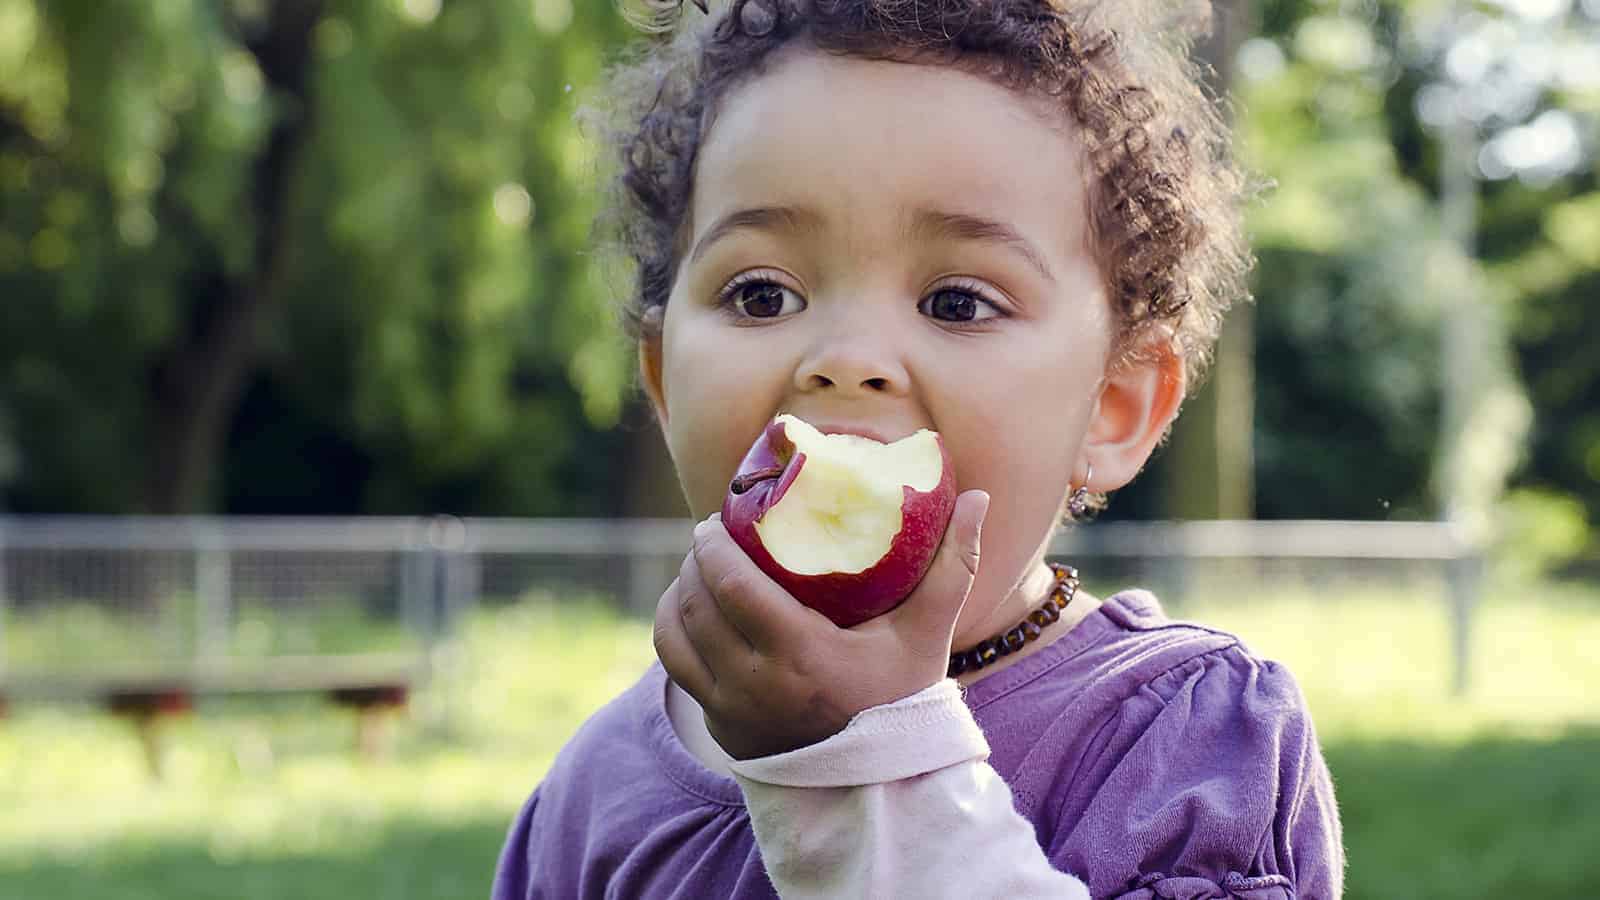 Study Finds Children Who Eat Fruits and Vegetables Have Better Mental Health